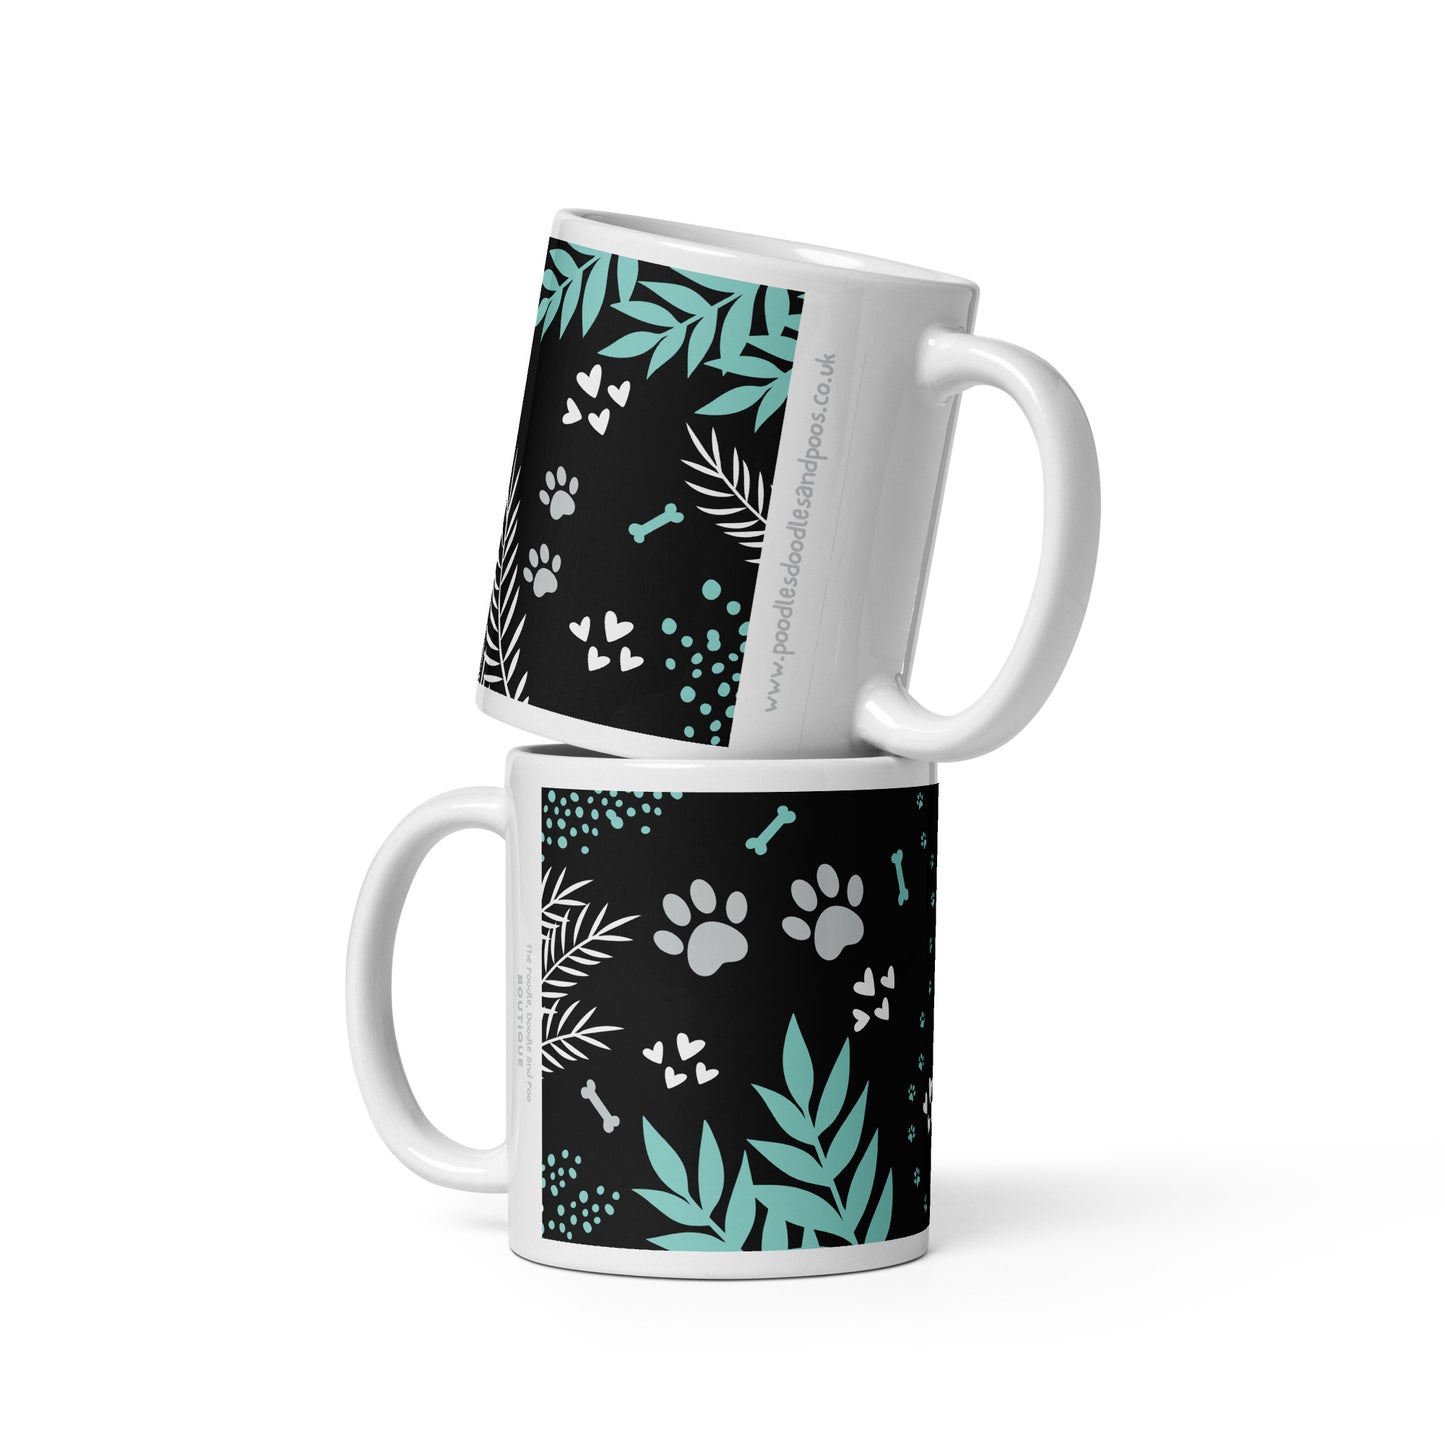 Signature Collection glossy mug in black